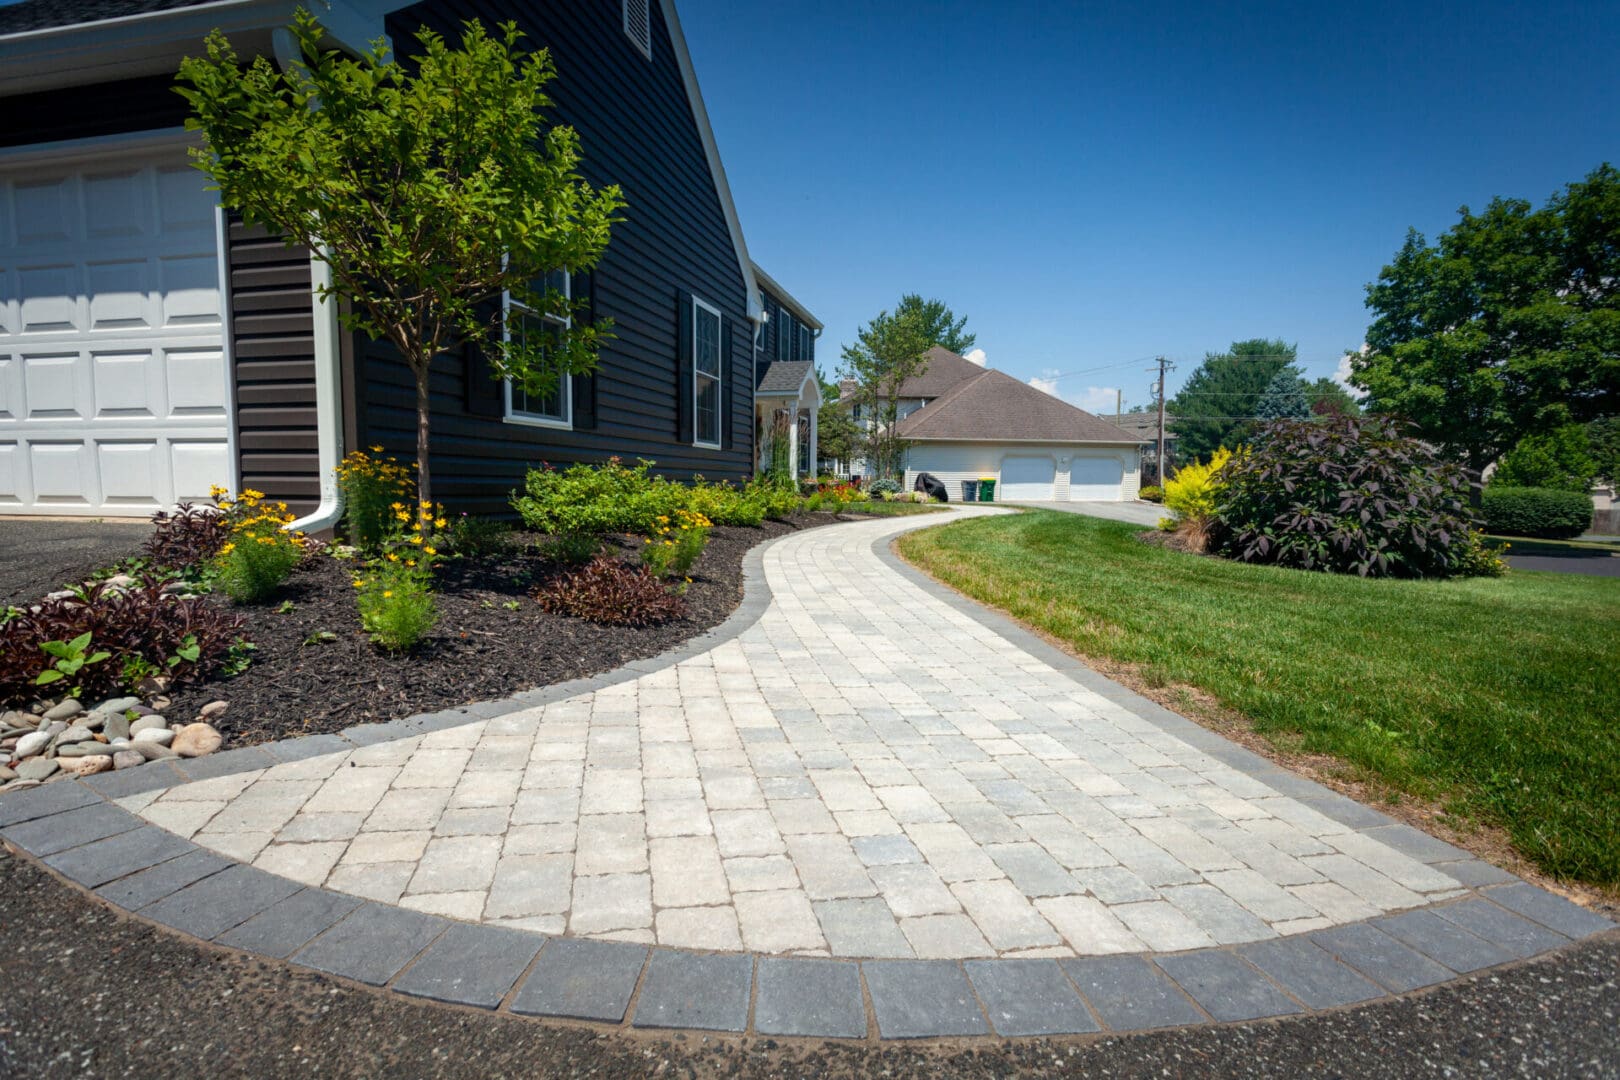 A driveway with brick pavers in front of a house, showcasing landscape design.